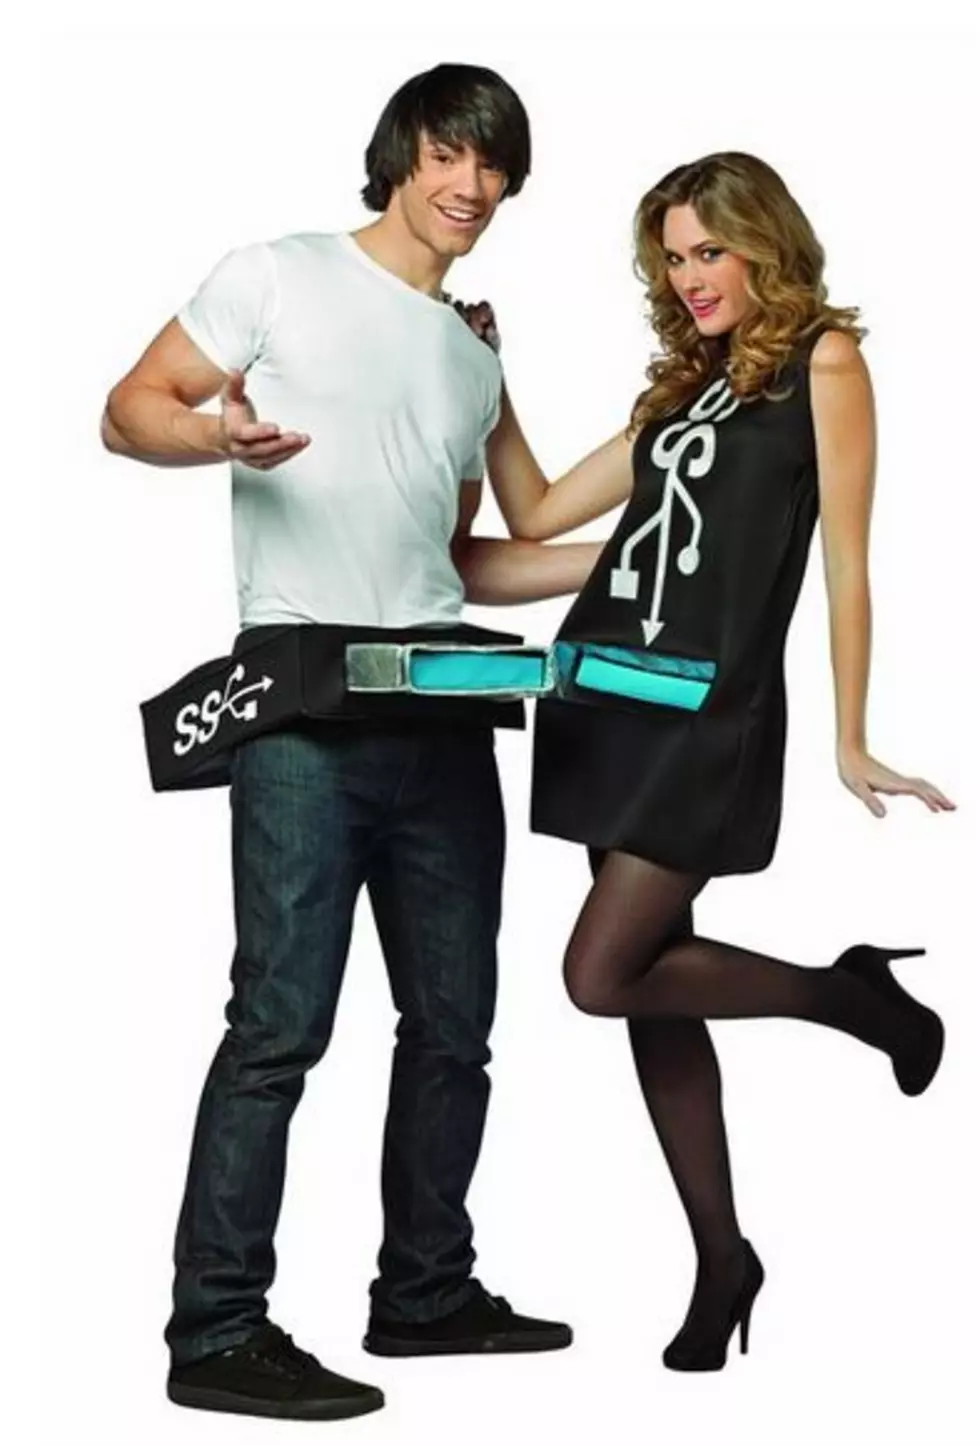 10 Least Appropriate Couples Costumes for Halloween [PHOTOS]